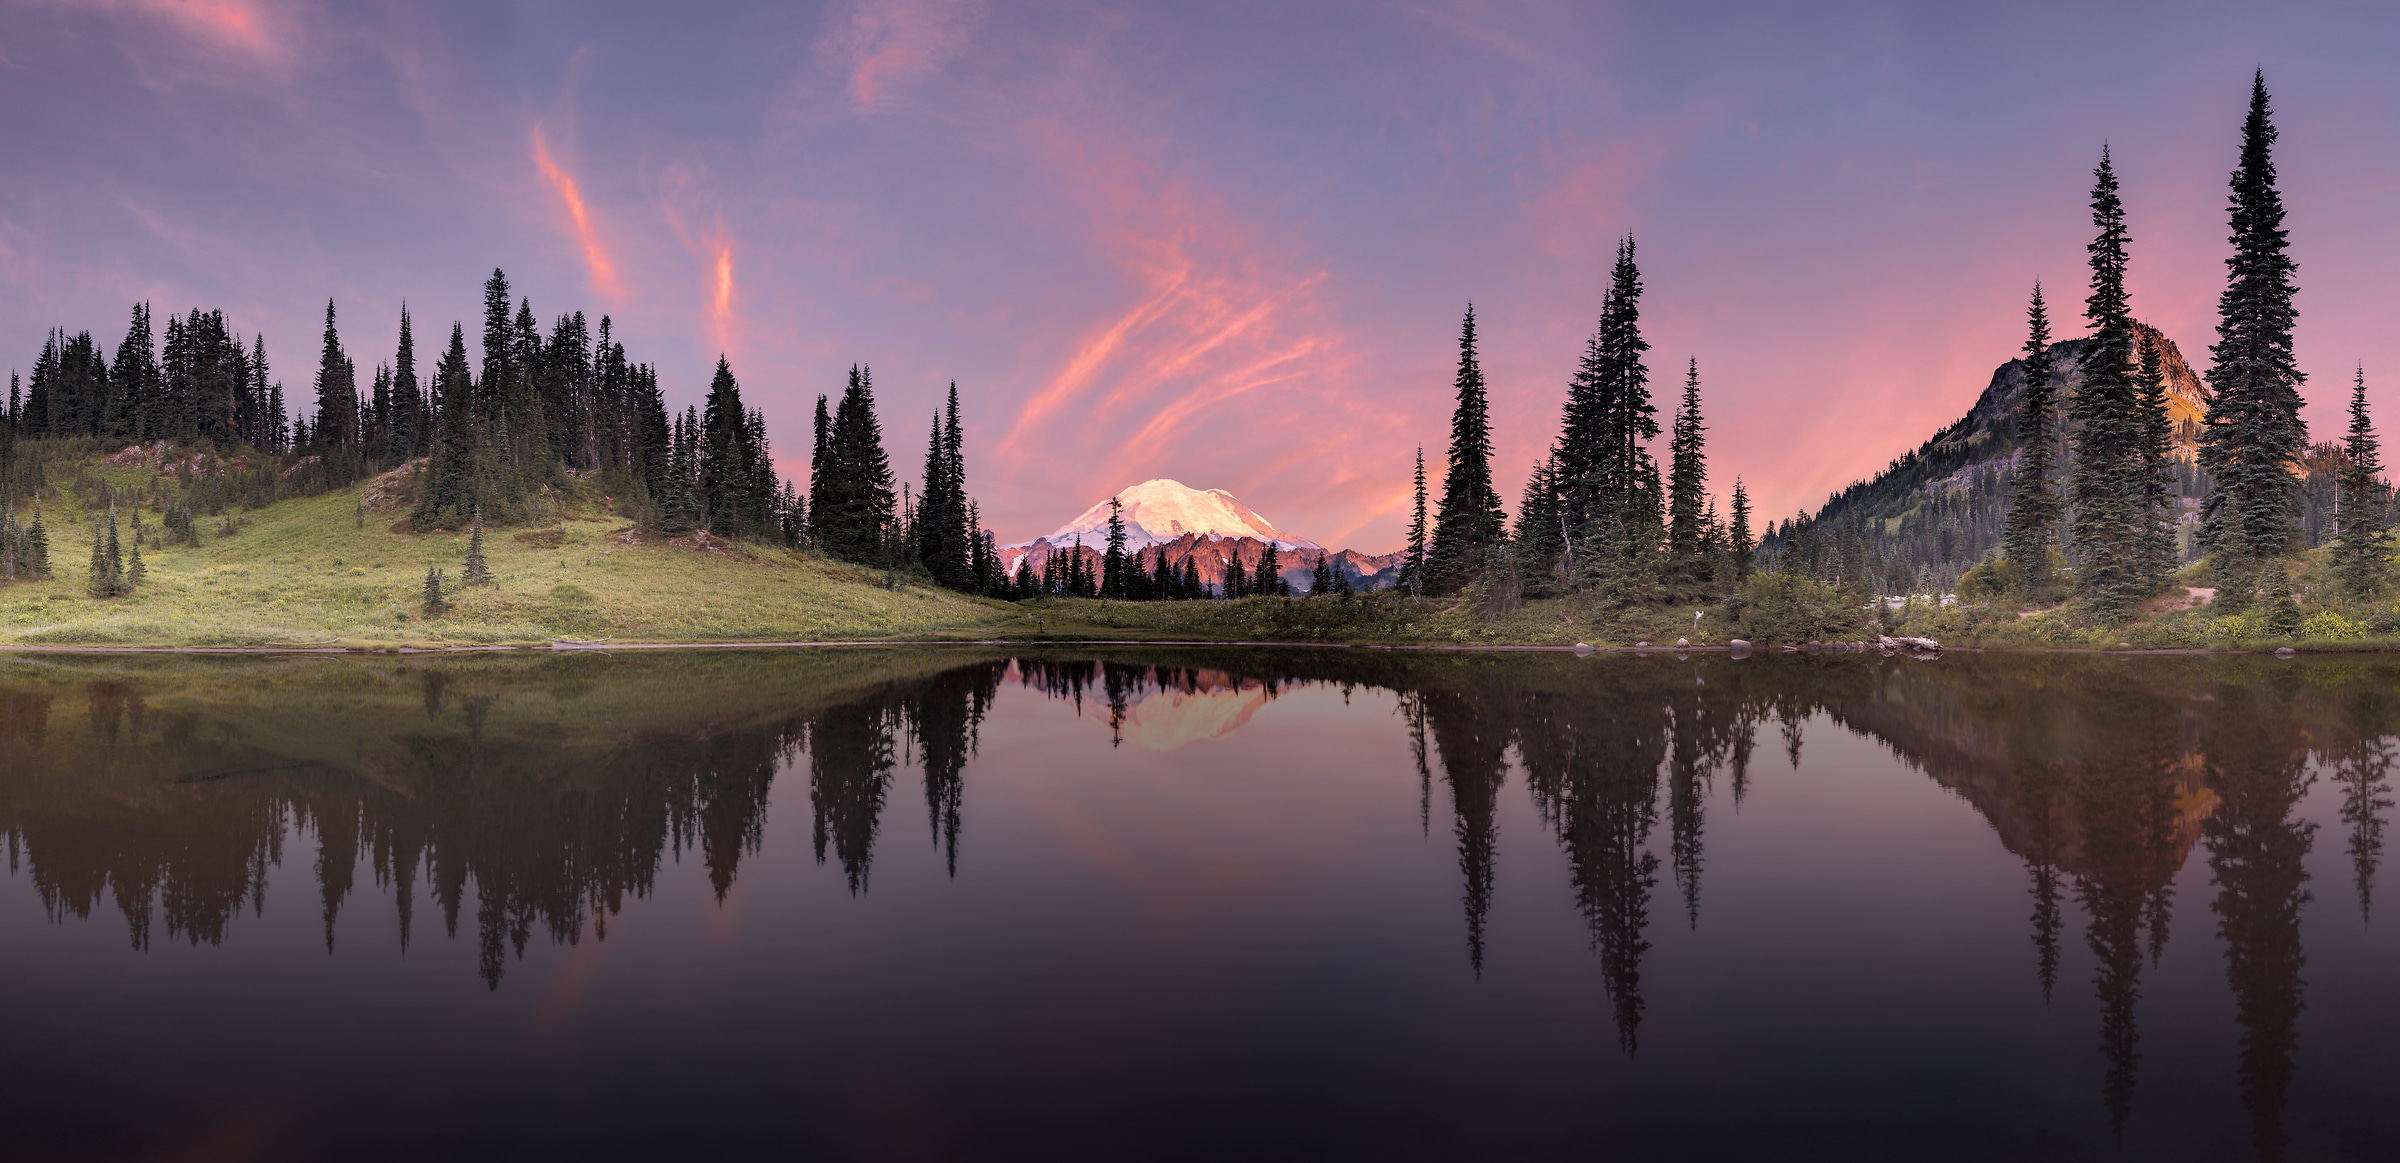 424 megapixels! A very high resolution, large-format VAST photo print of a landscape reflected in a lake; photograph created by Chris Collacott in Little Tipsoo Lake, Mount Rainier National Park, Washington